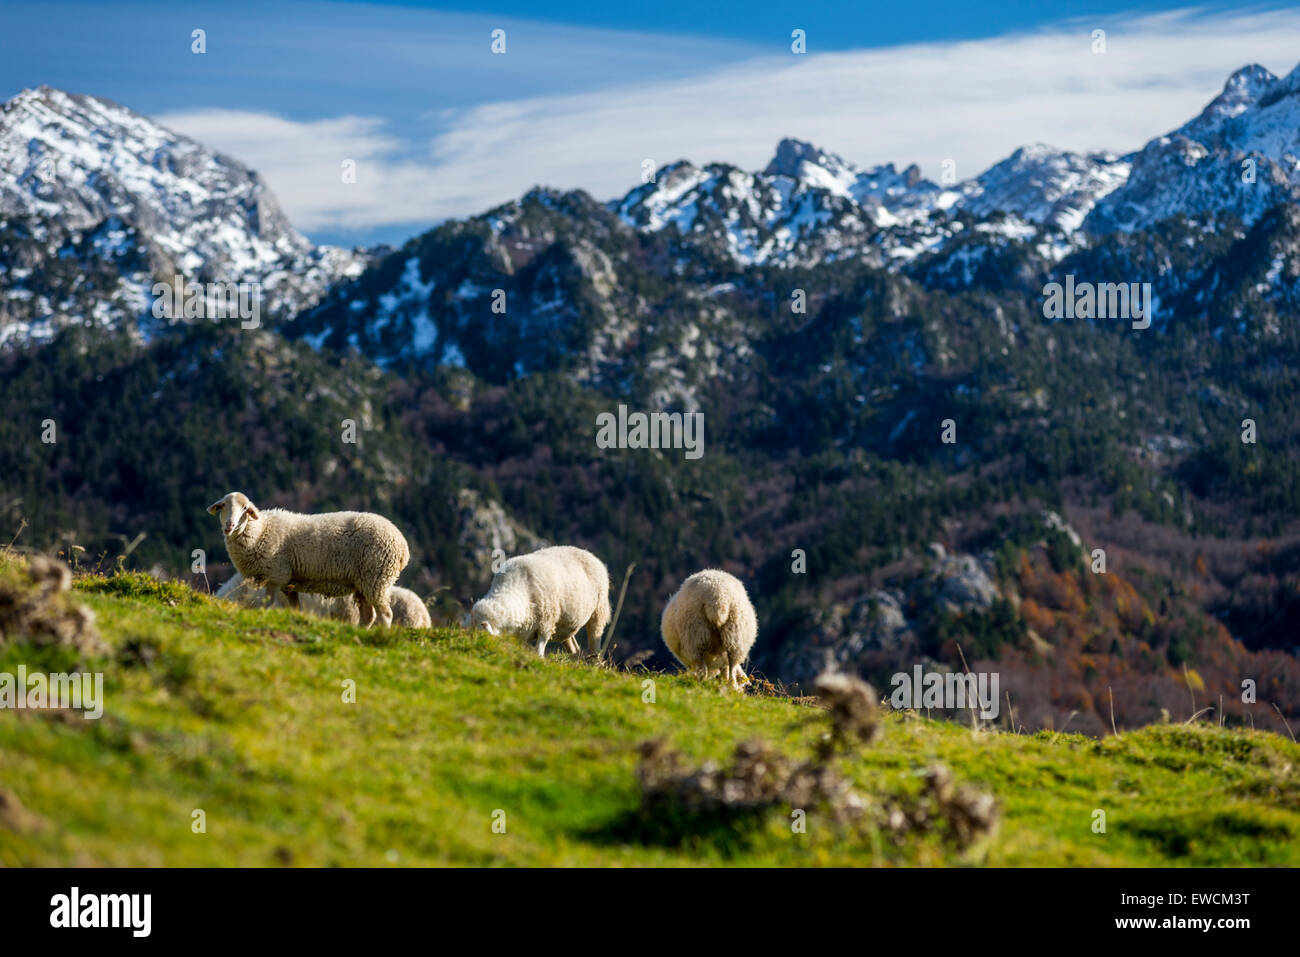 Sheeps standed in Larra Belagua area, Roncal Valley, Navarre Pyrenees, Spain Stock Photo